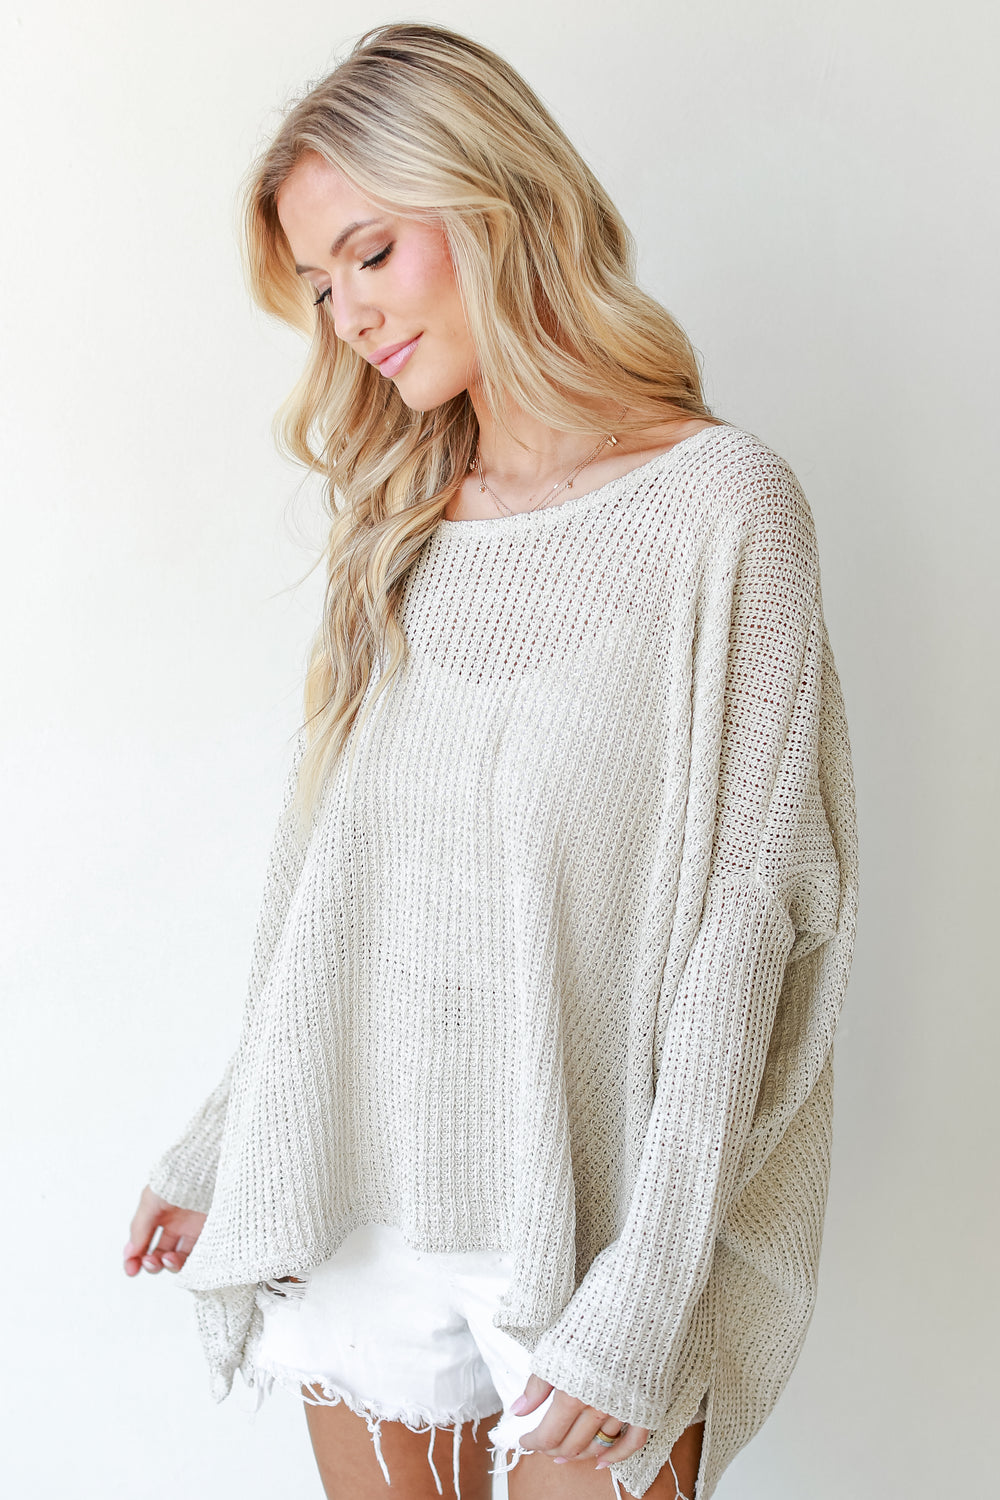 Loose Knit Sweater from dress up